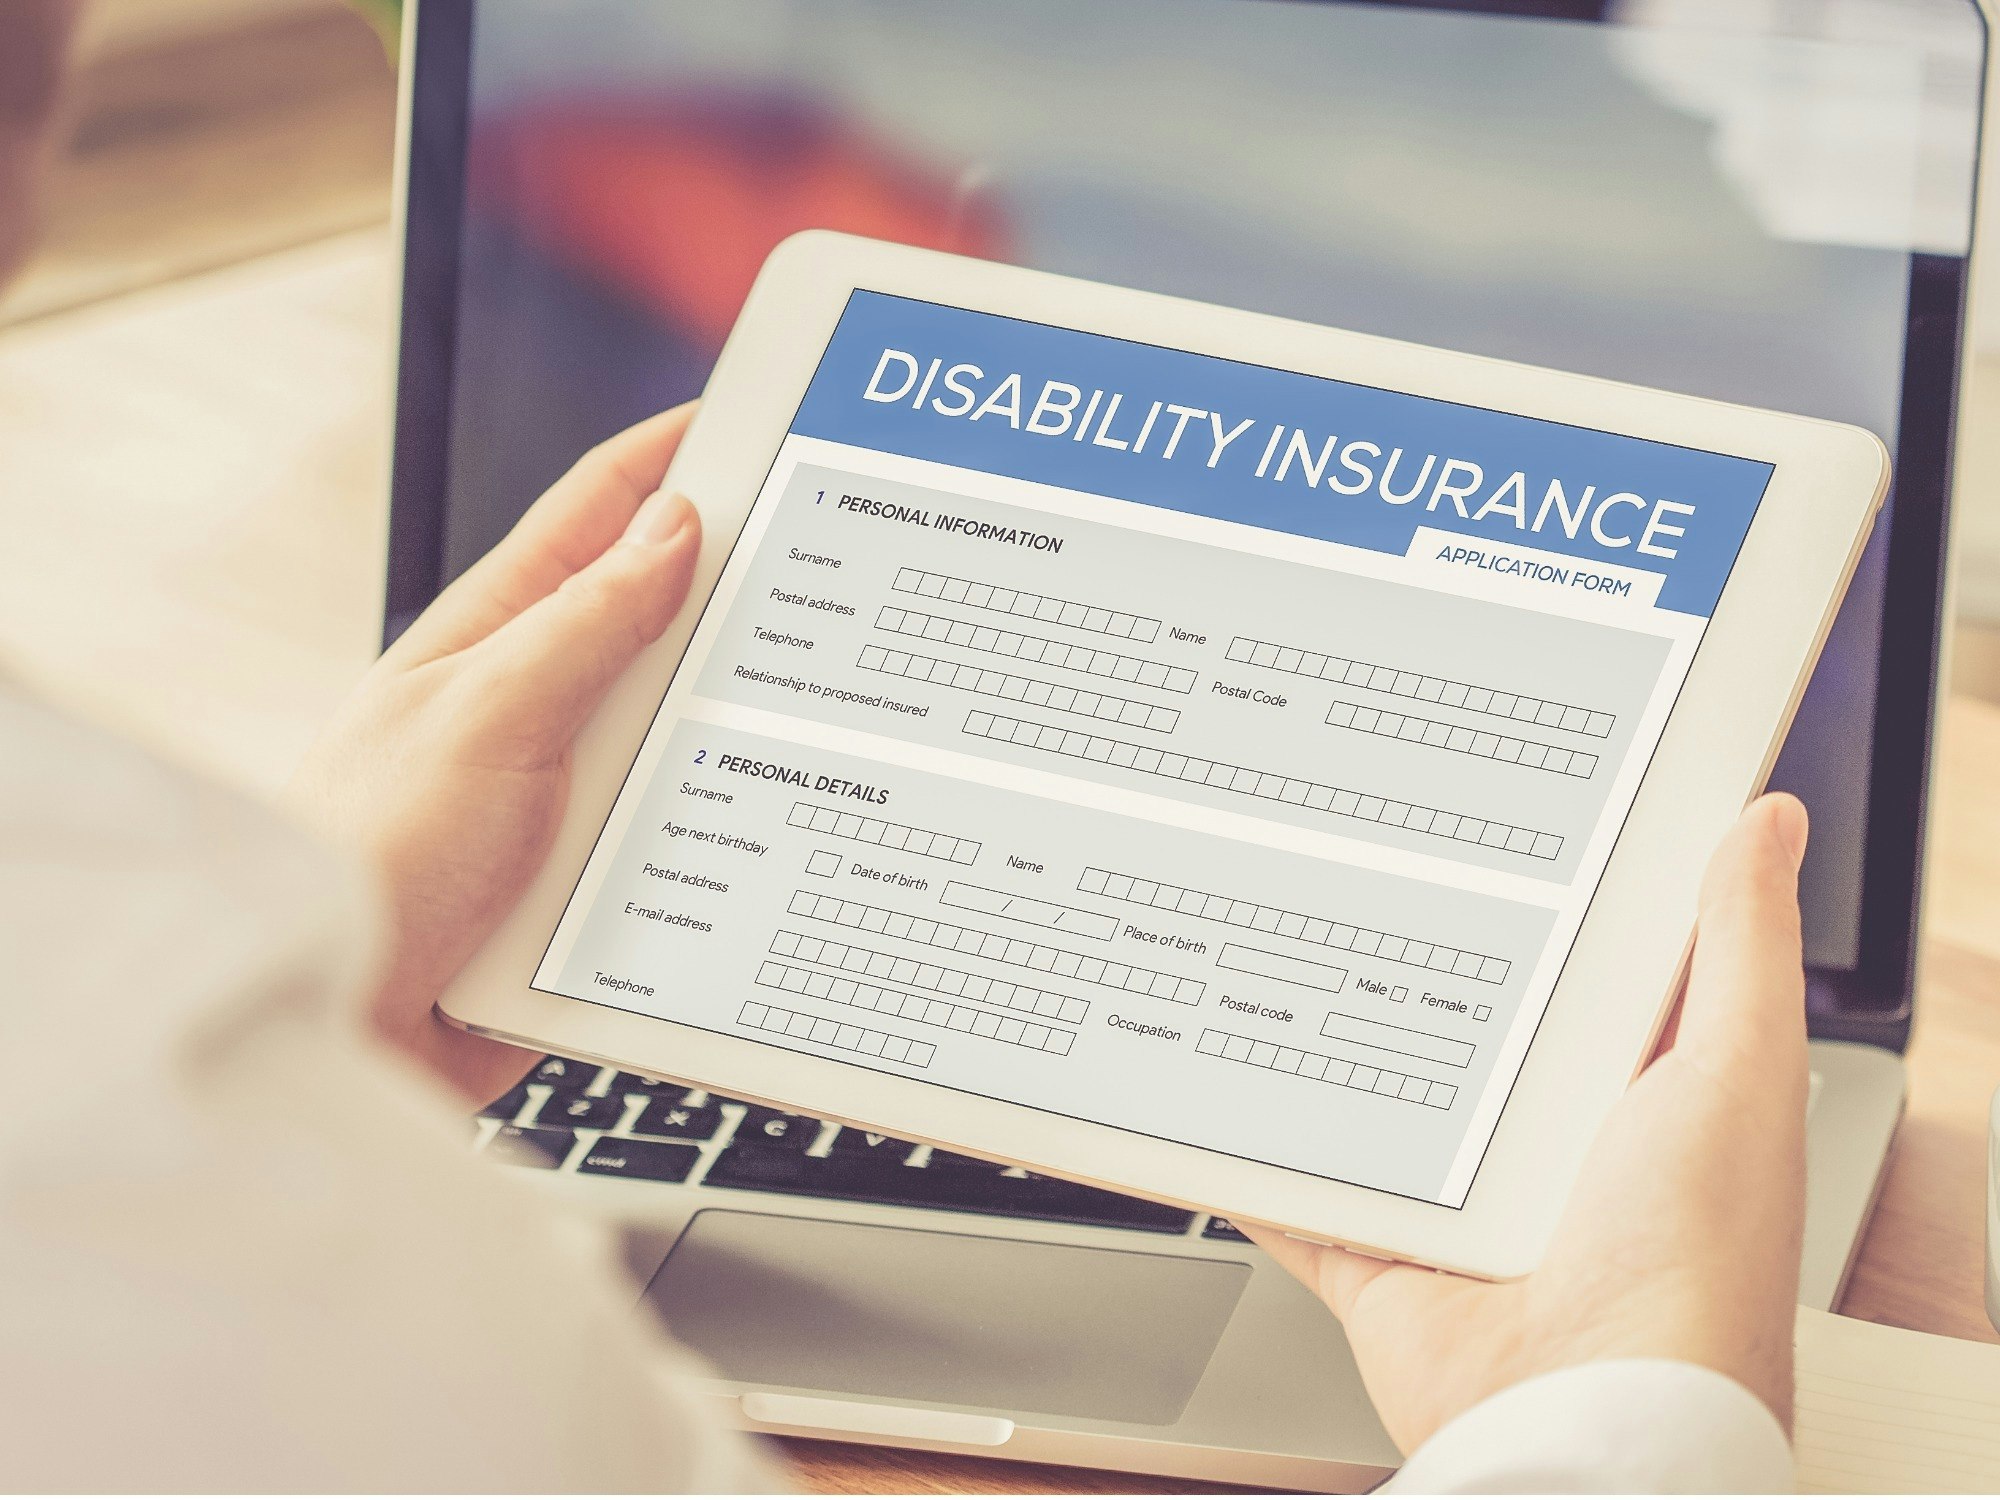 &#8220;The lack of sustainability of the disability insurance market is one of the most pressing issues for life insurers today.&#8221; (Source: iStock) 
